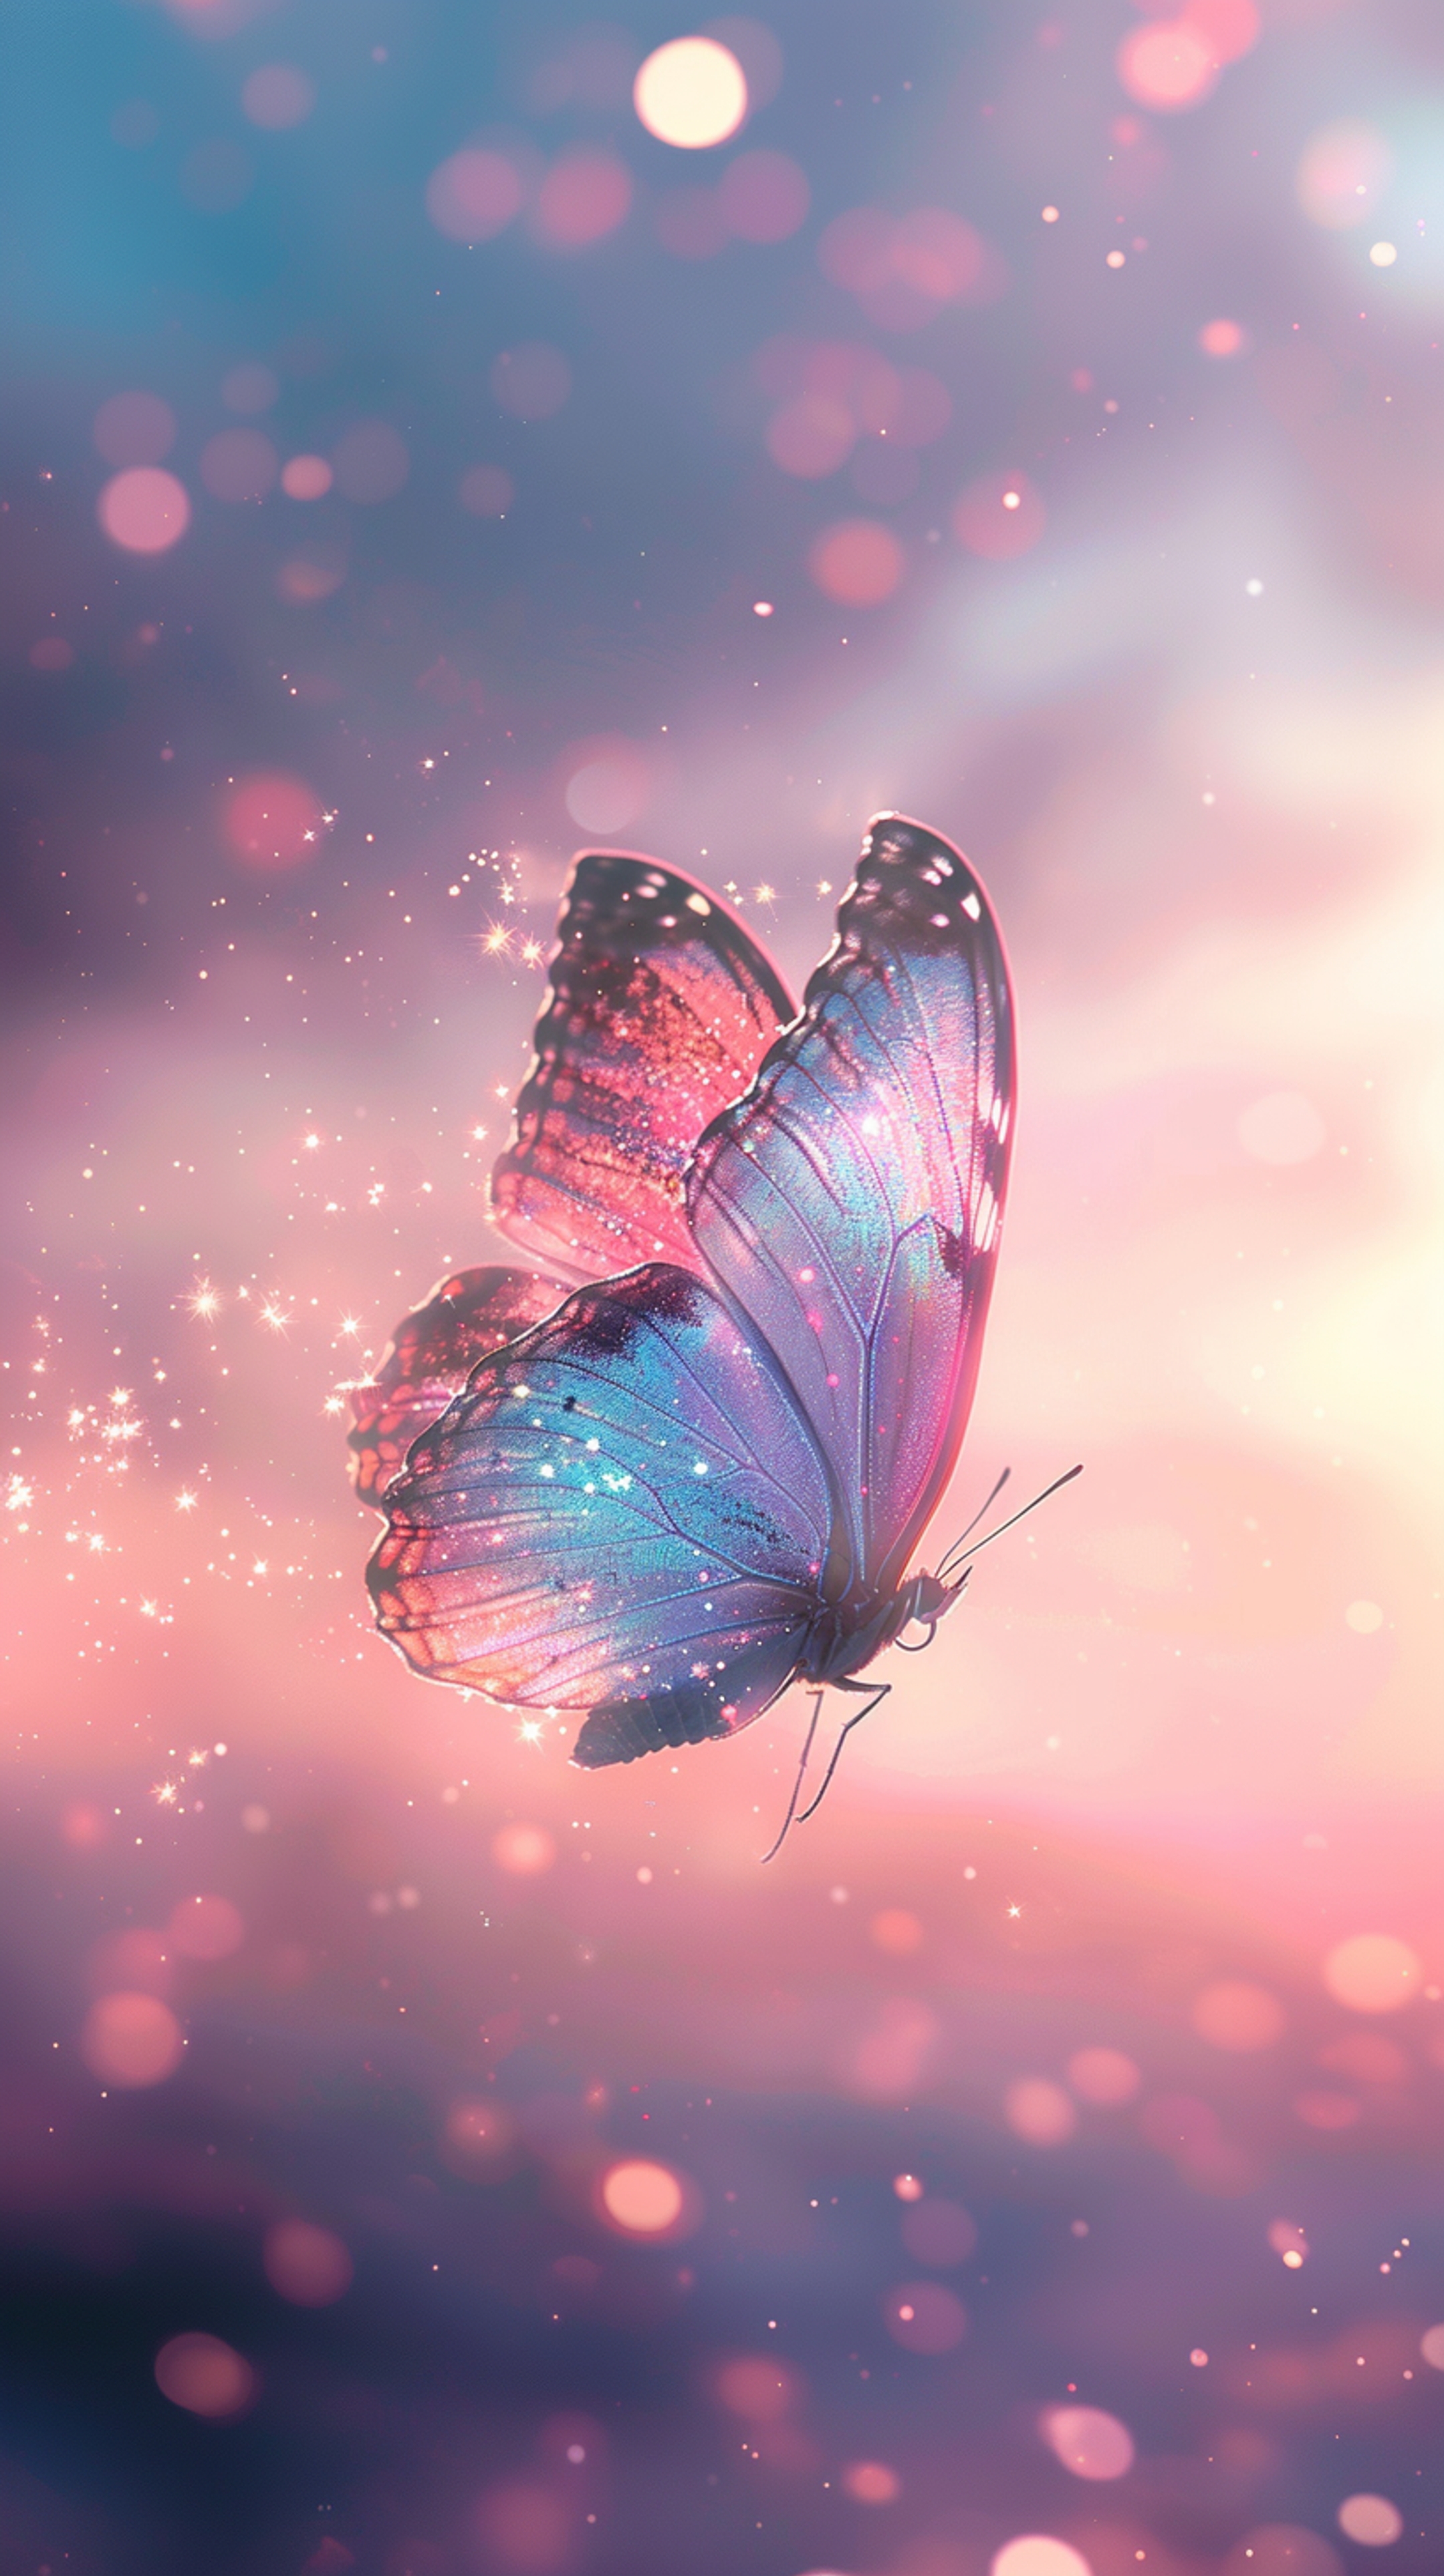 Magical Sparkling Butterfly in Dreamy Pink Sky Tapeet[1278b2409cd84640a5d9]